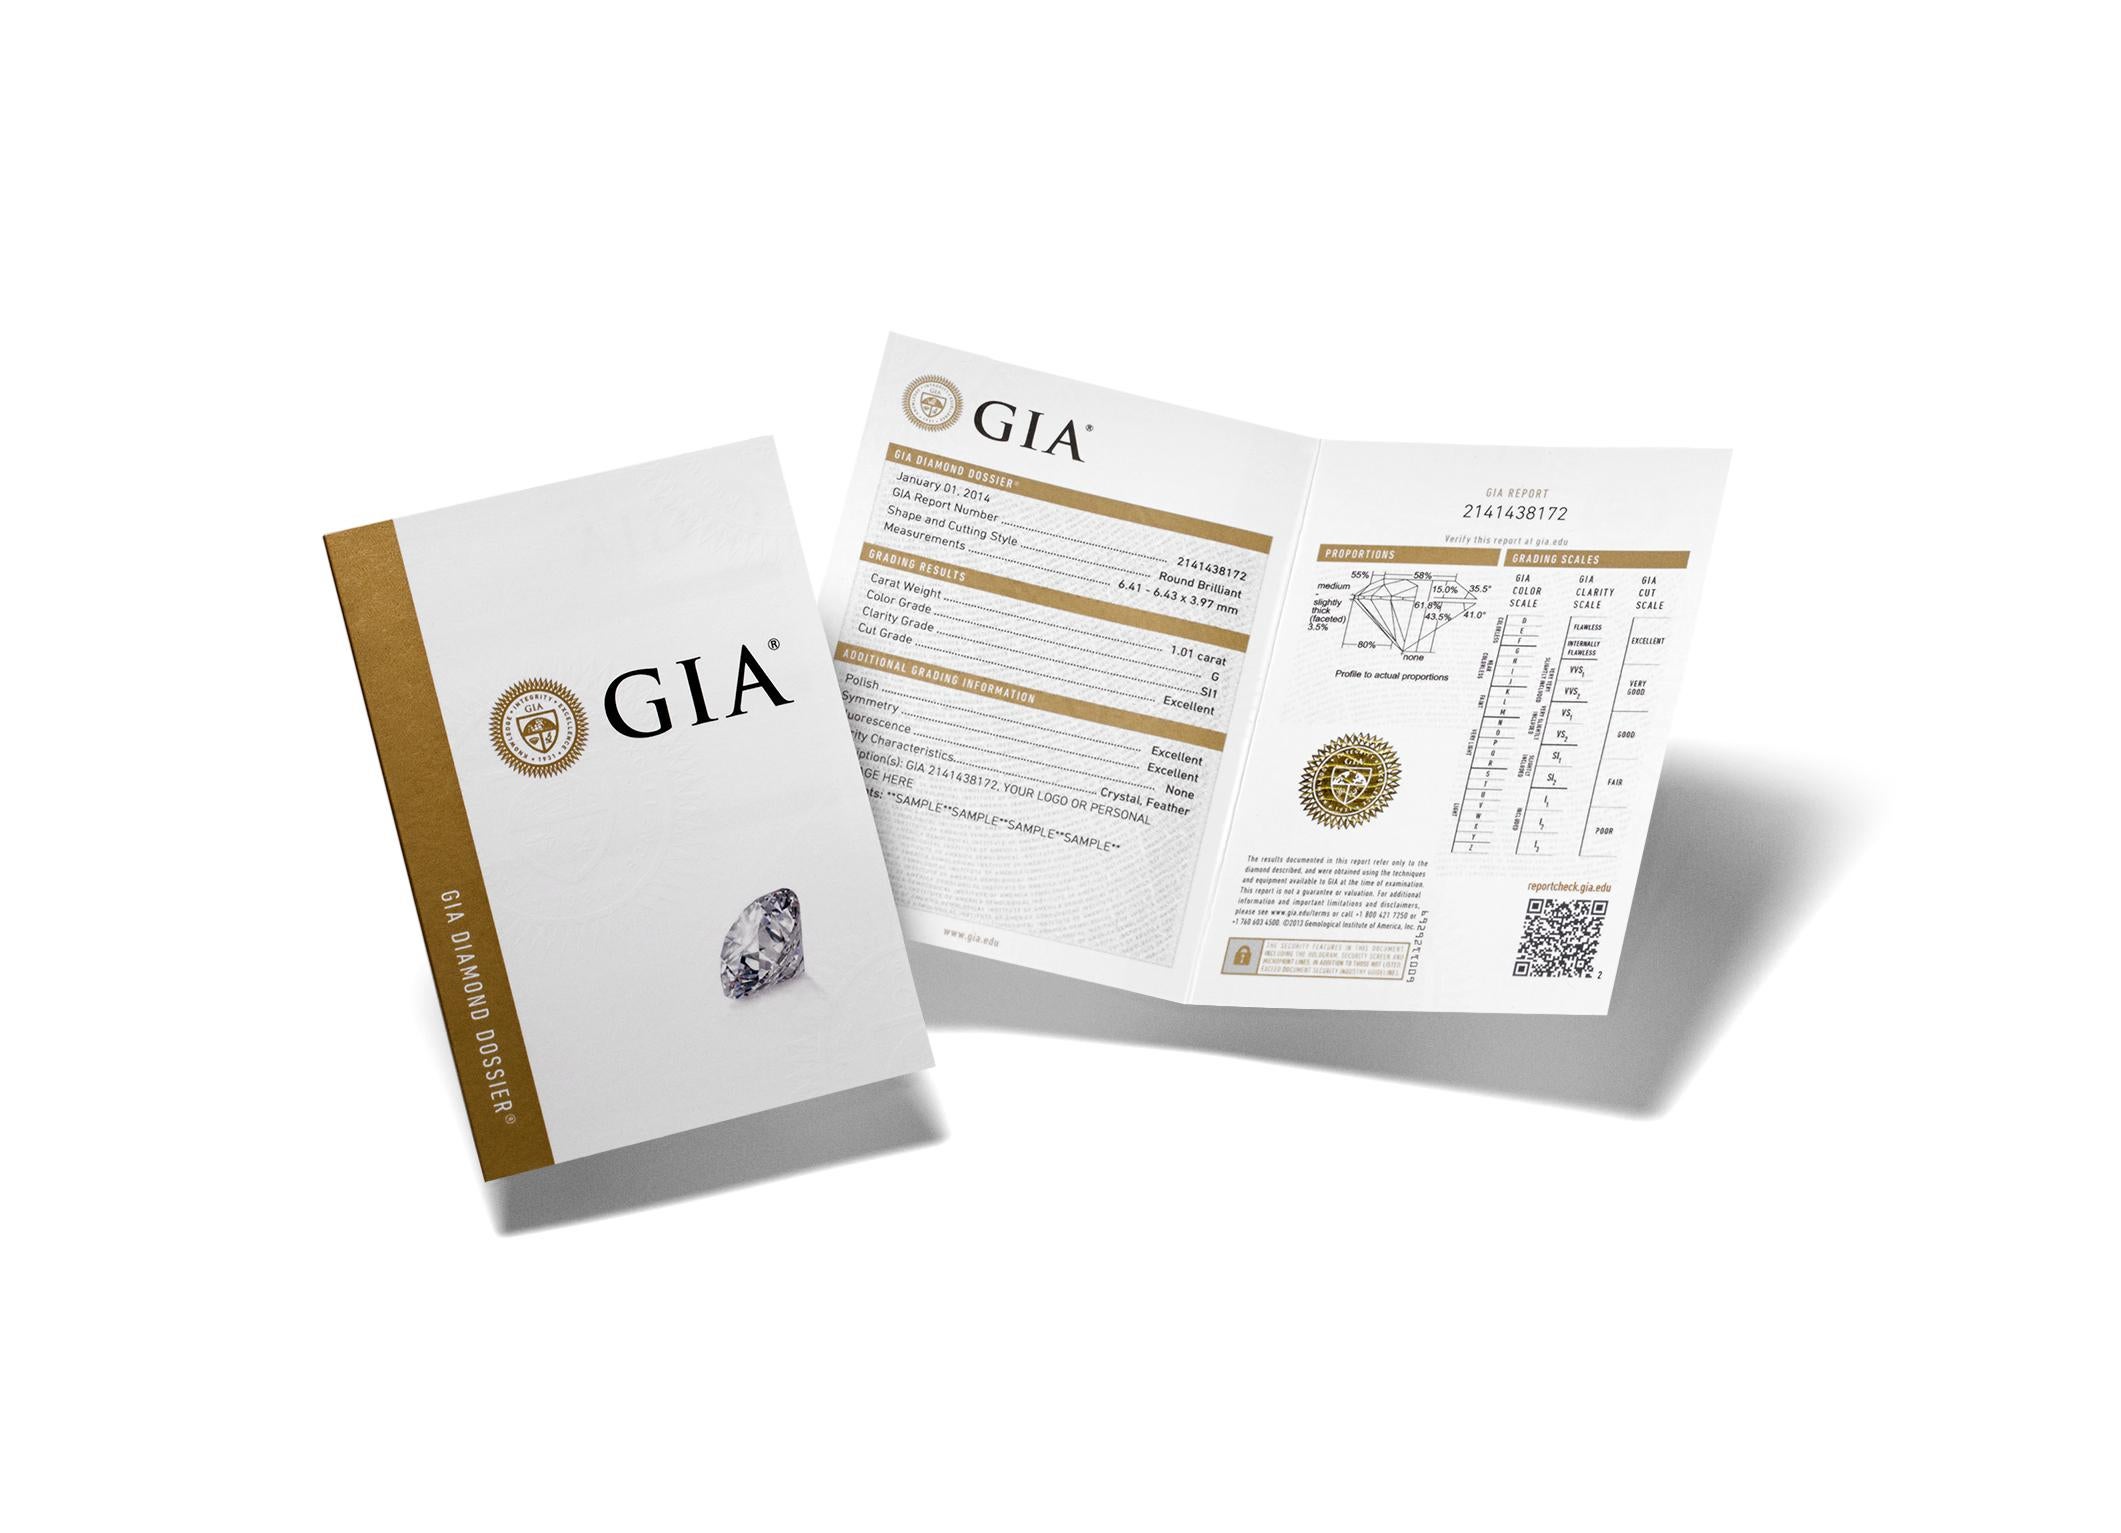 GIA Certified 0.50 Carat, E/IF, Brilliant Cut, Excellent Natural Diamond

Perfect Brilliants for perfect gifts.

5 C's:

Certificate: GIA
Carat: 0.50ct
Color: E
Clarity: IF(Internally Flawless)
Cut: Excellent

Polish: Excellent
Symmetry: